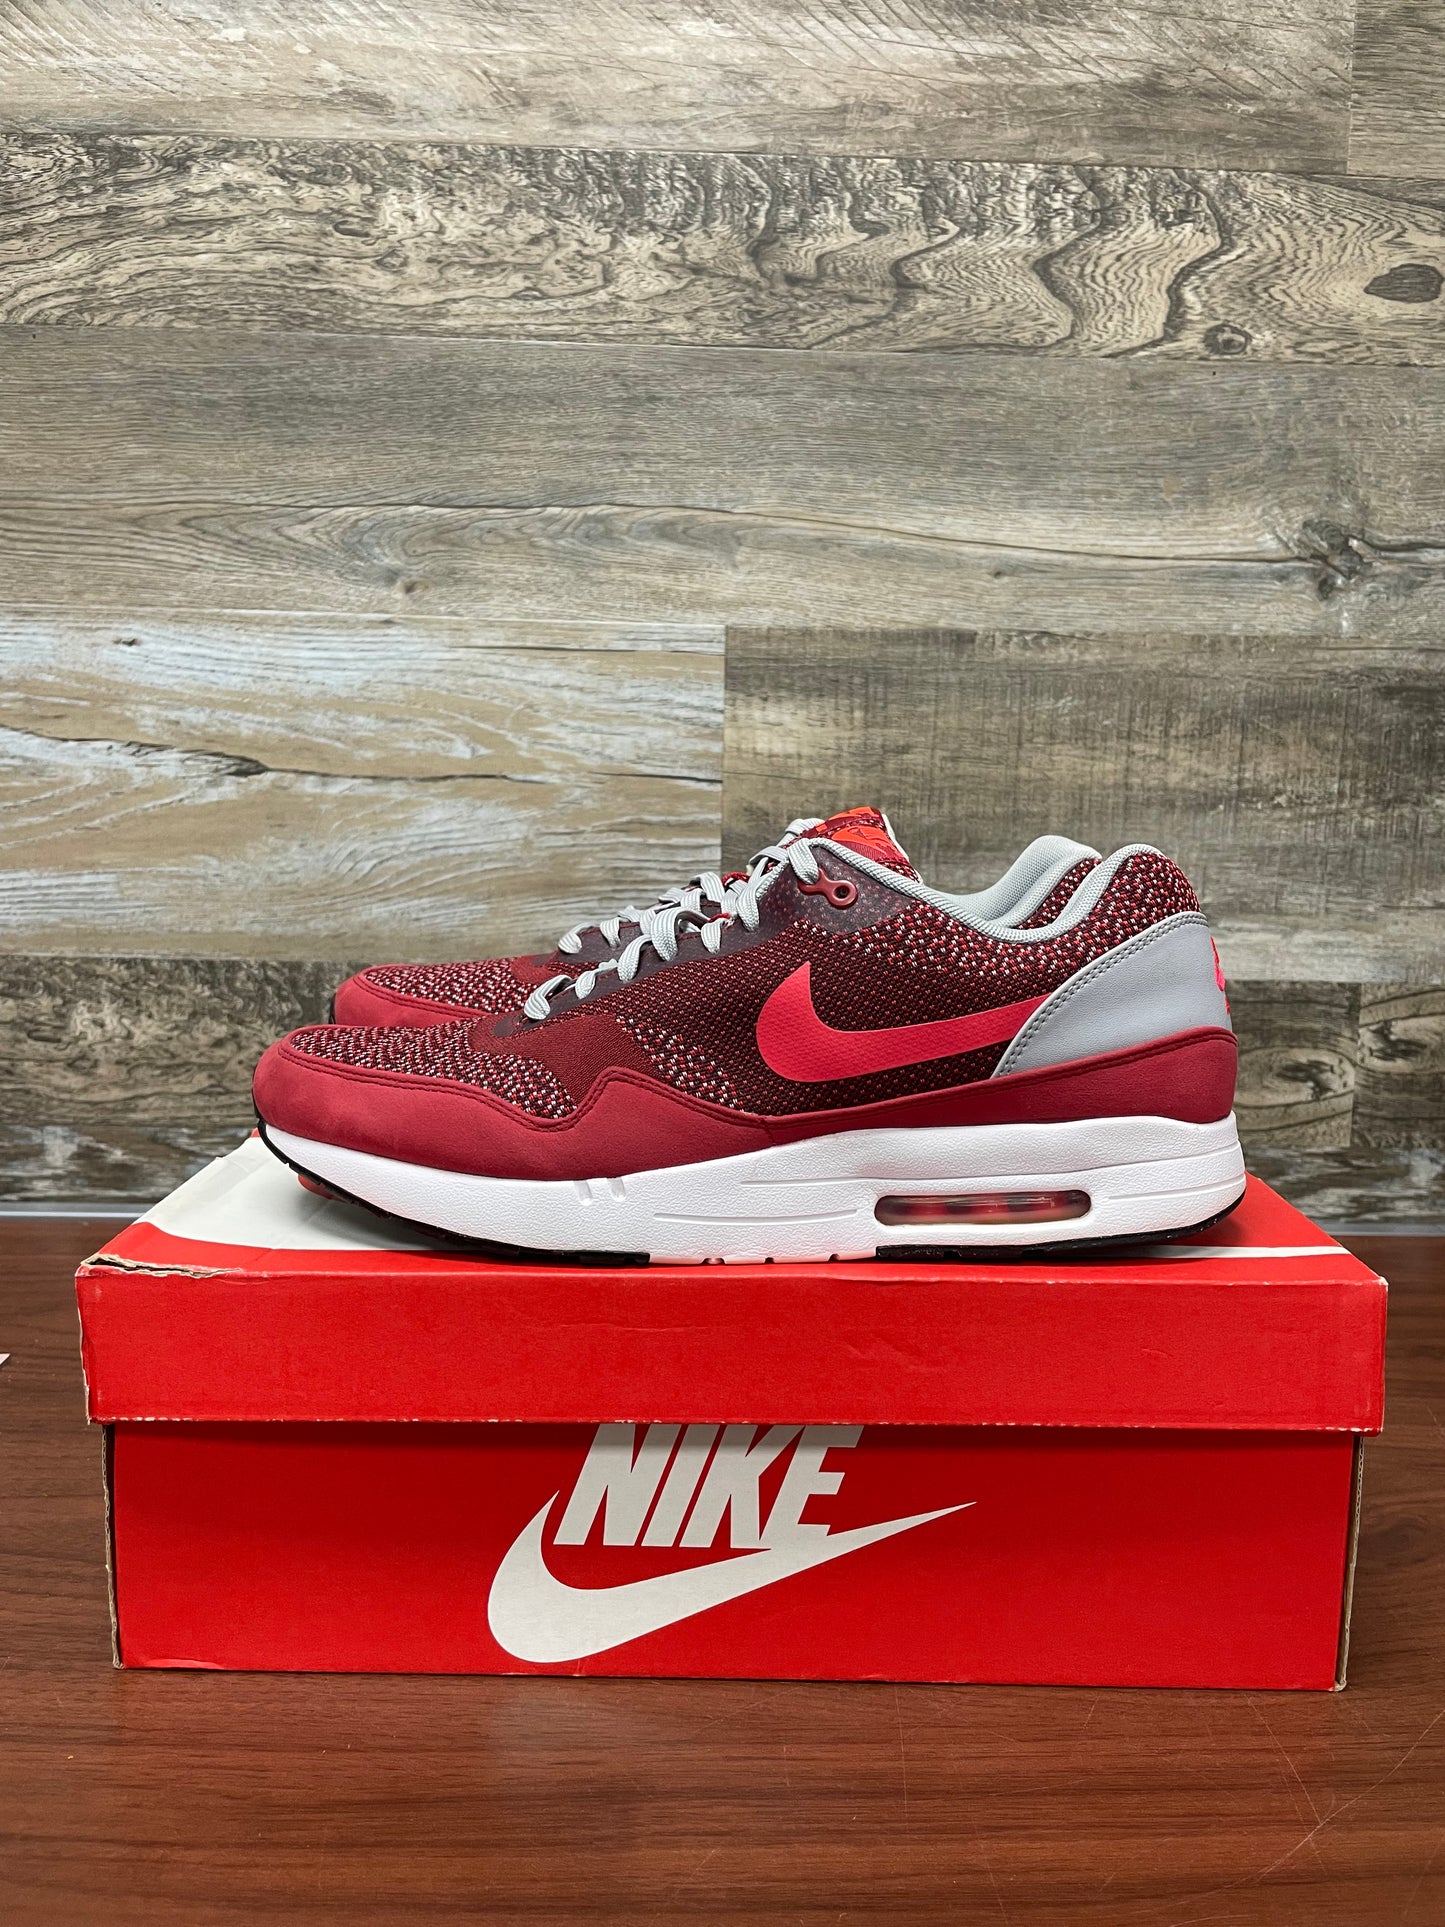 Air Max 1 JCRD Gym Red Size 12